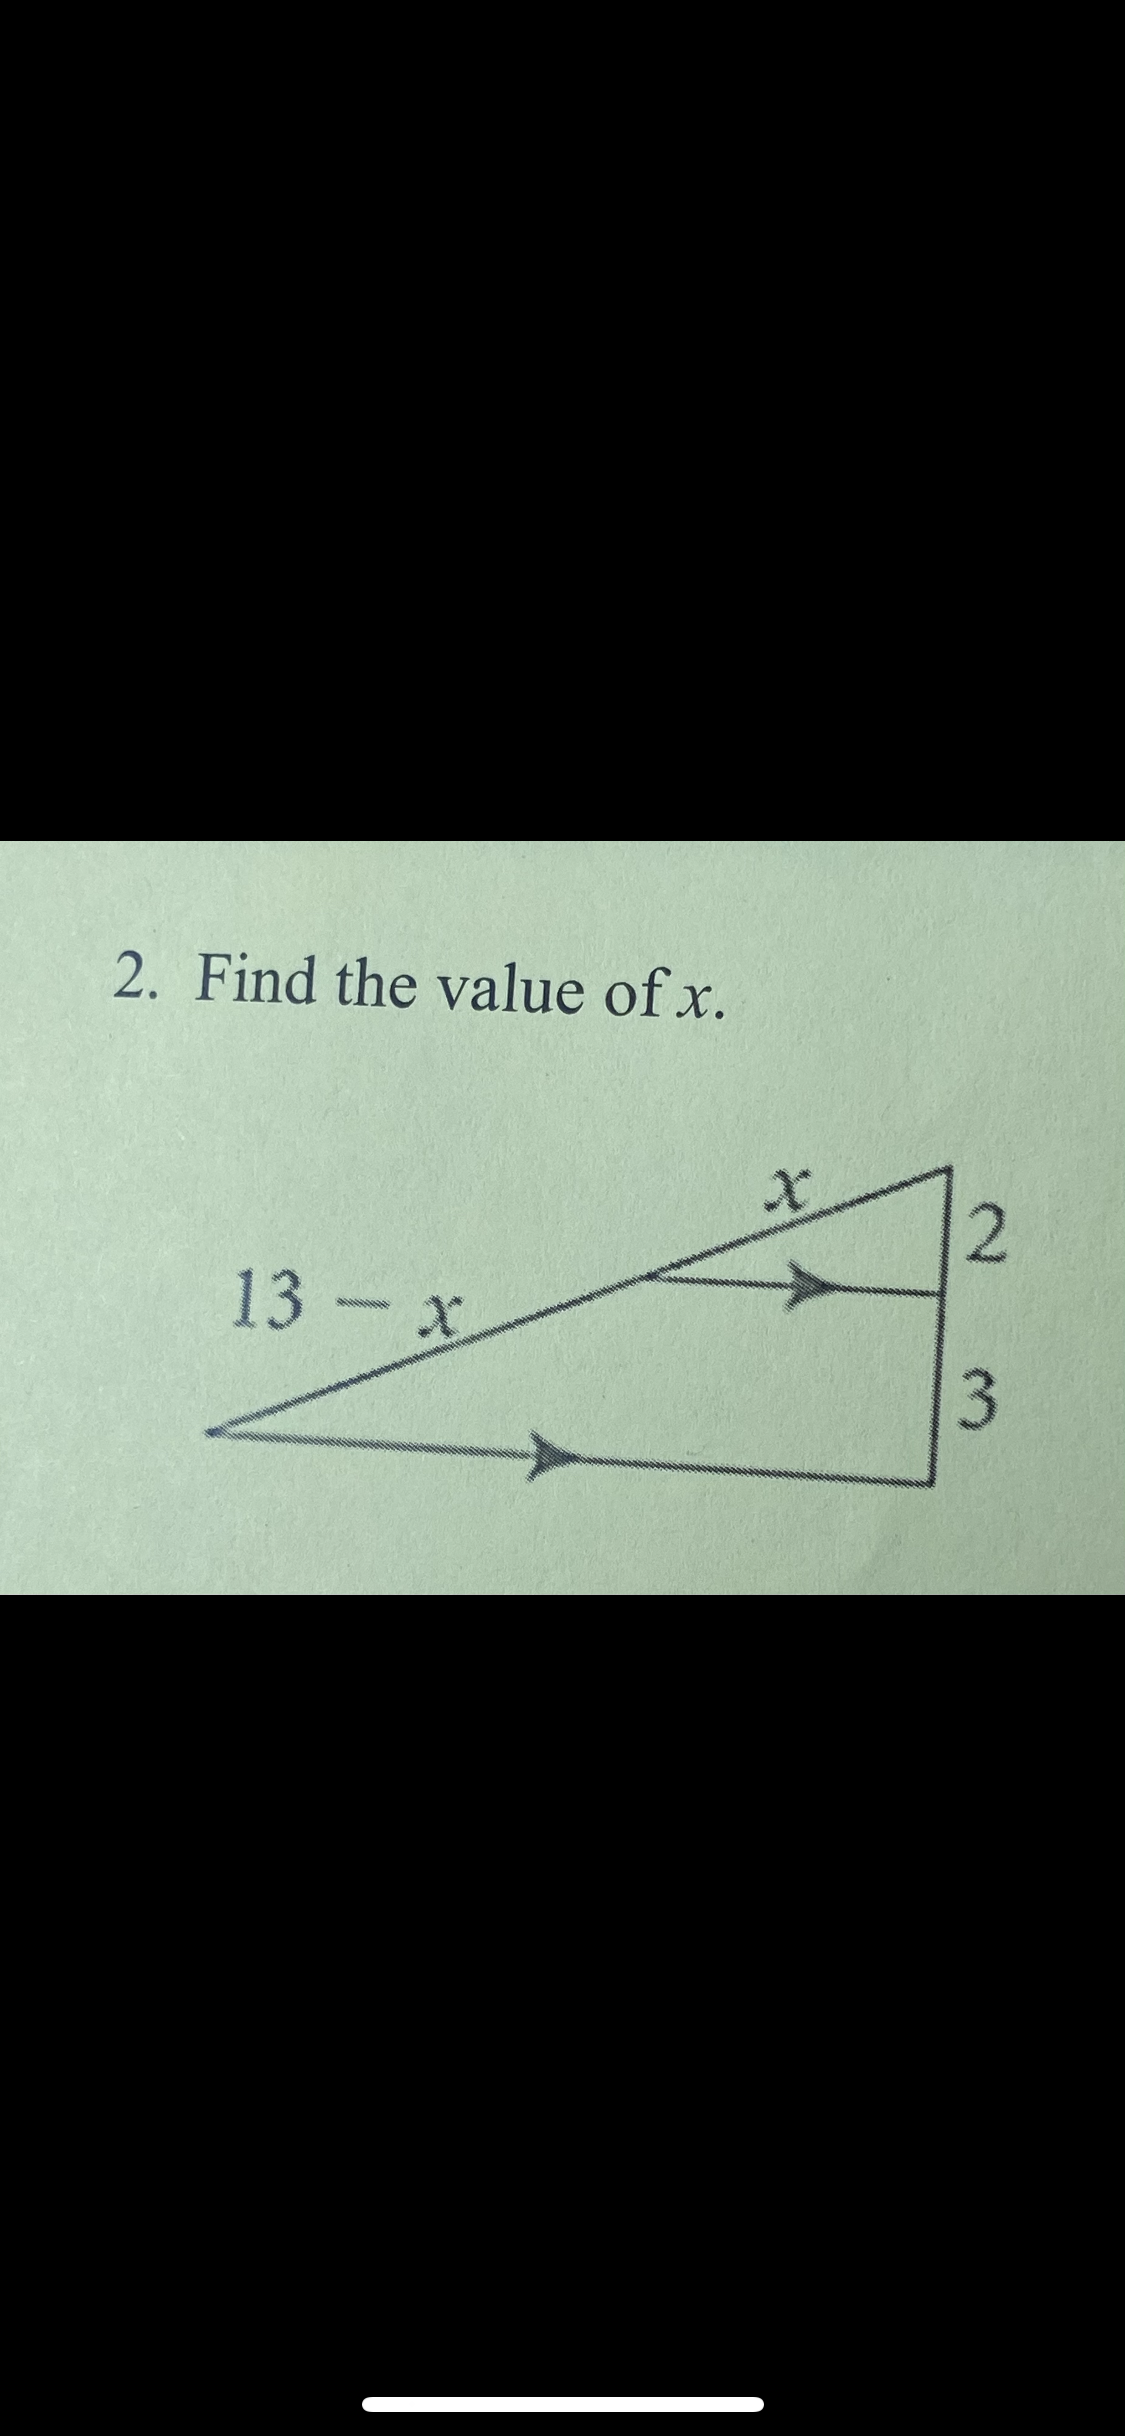 2. Find the value of x.
13 x
2.
3.
